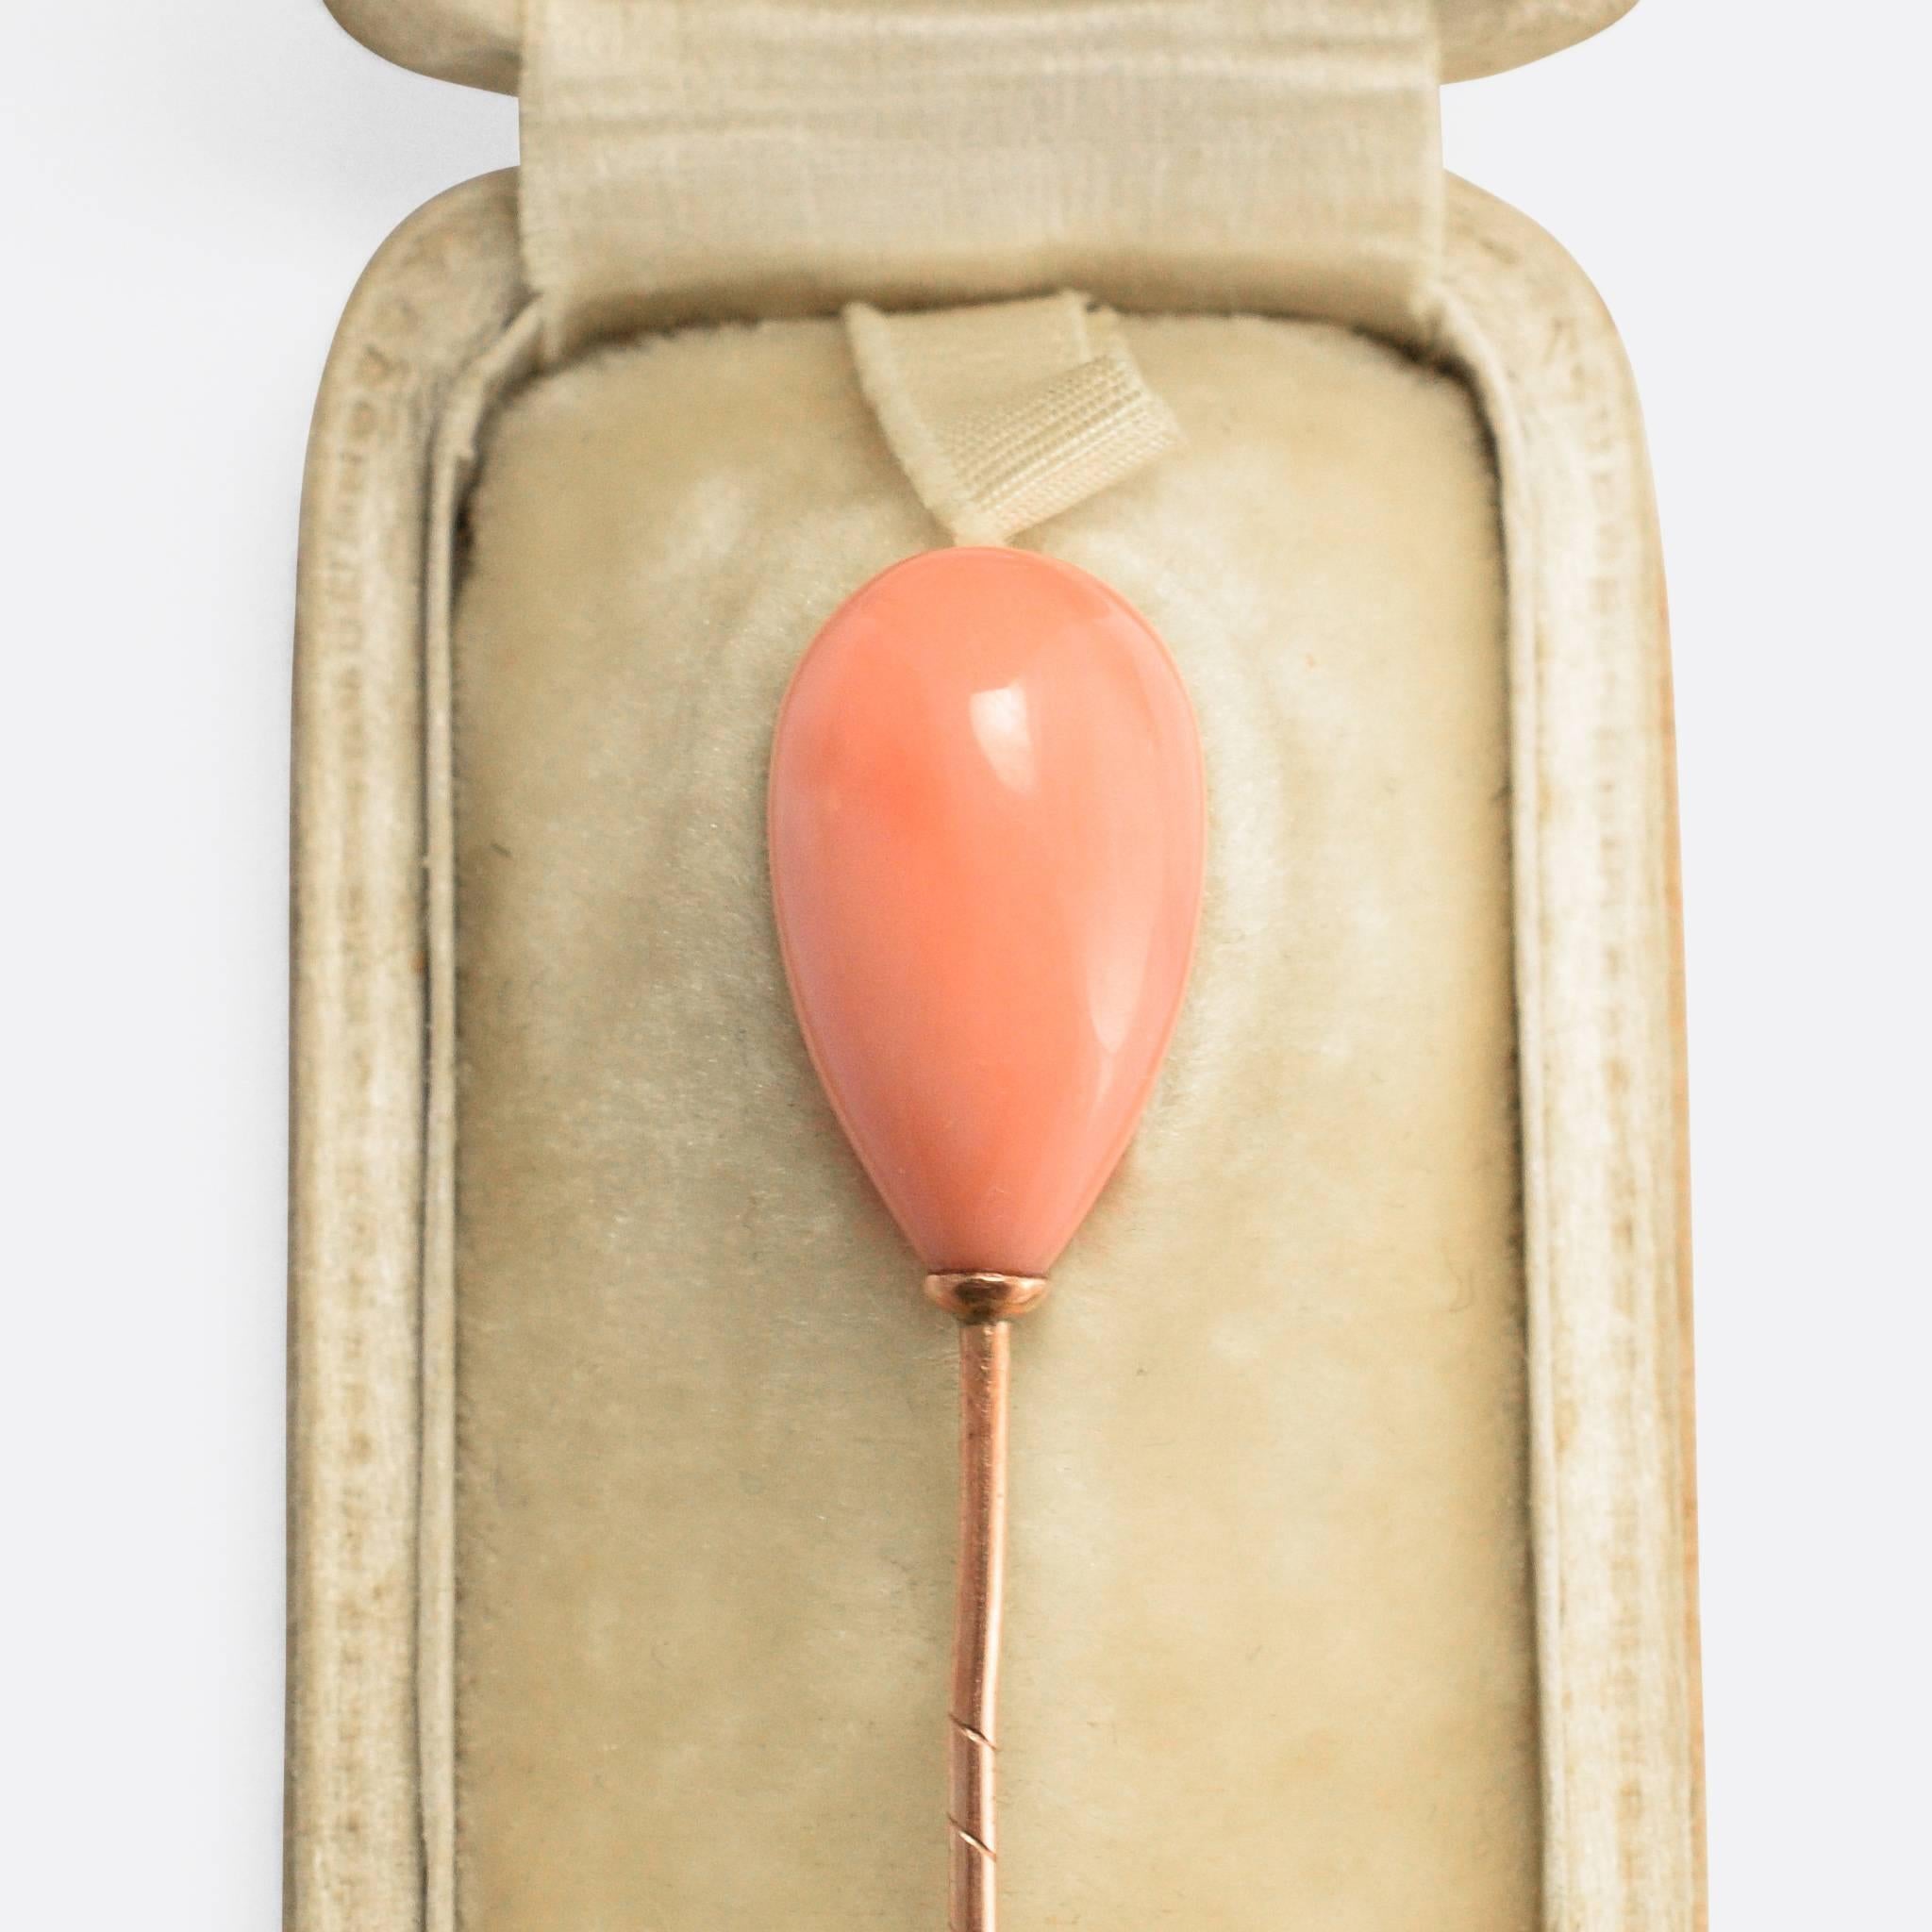 A cool antique stick pin, with a coral egg head and offered in its original fitted presentation box. The piece is Italian, retailed by Errico Brothers, Napoli, and dates from the 1870s. To be worn on a hat, scarf or lapel.

STONES
Natural